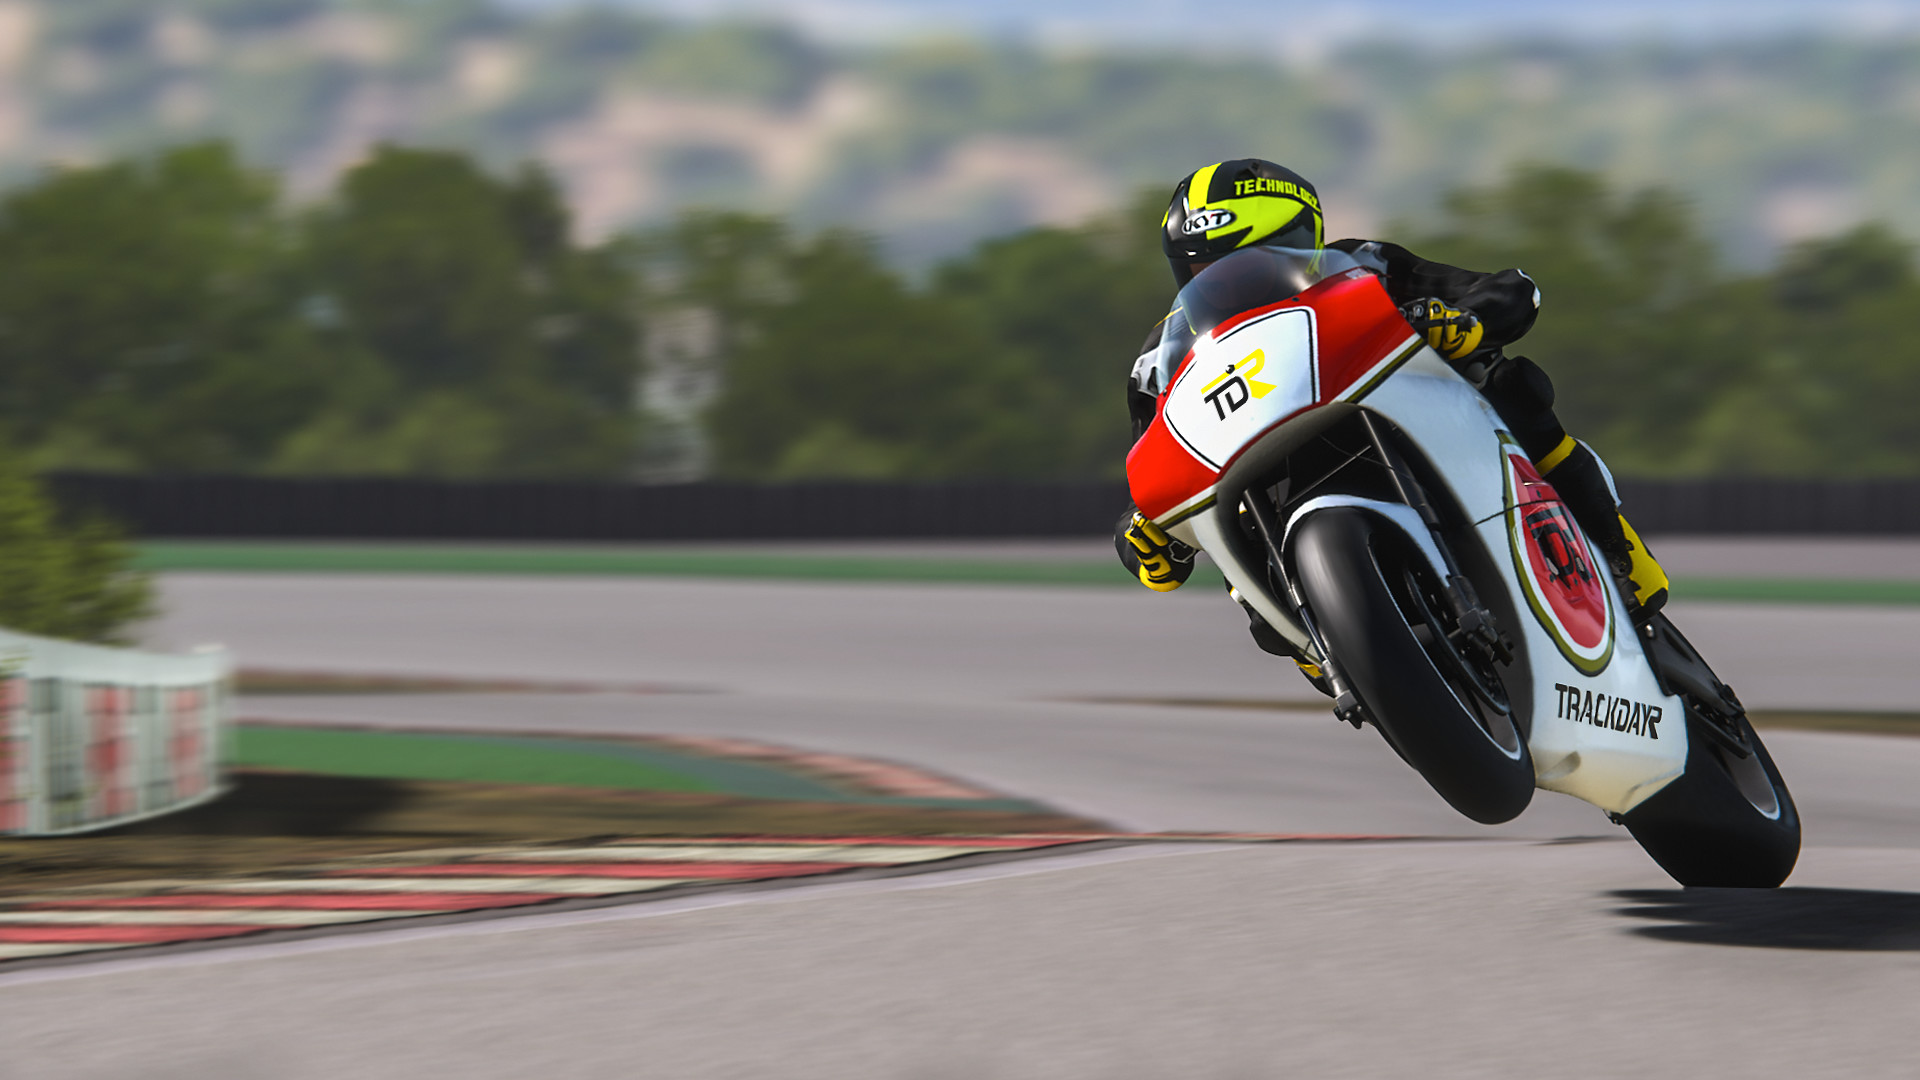 More information about "Track Day R (ex Bike Sim Experience) approda su Steam"